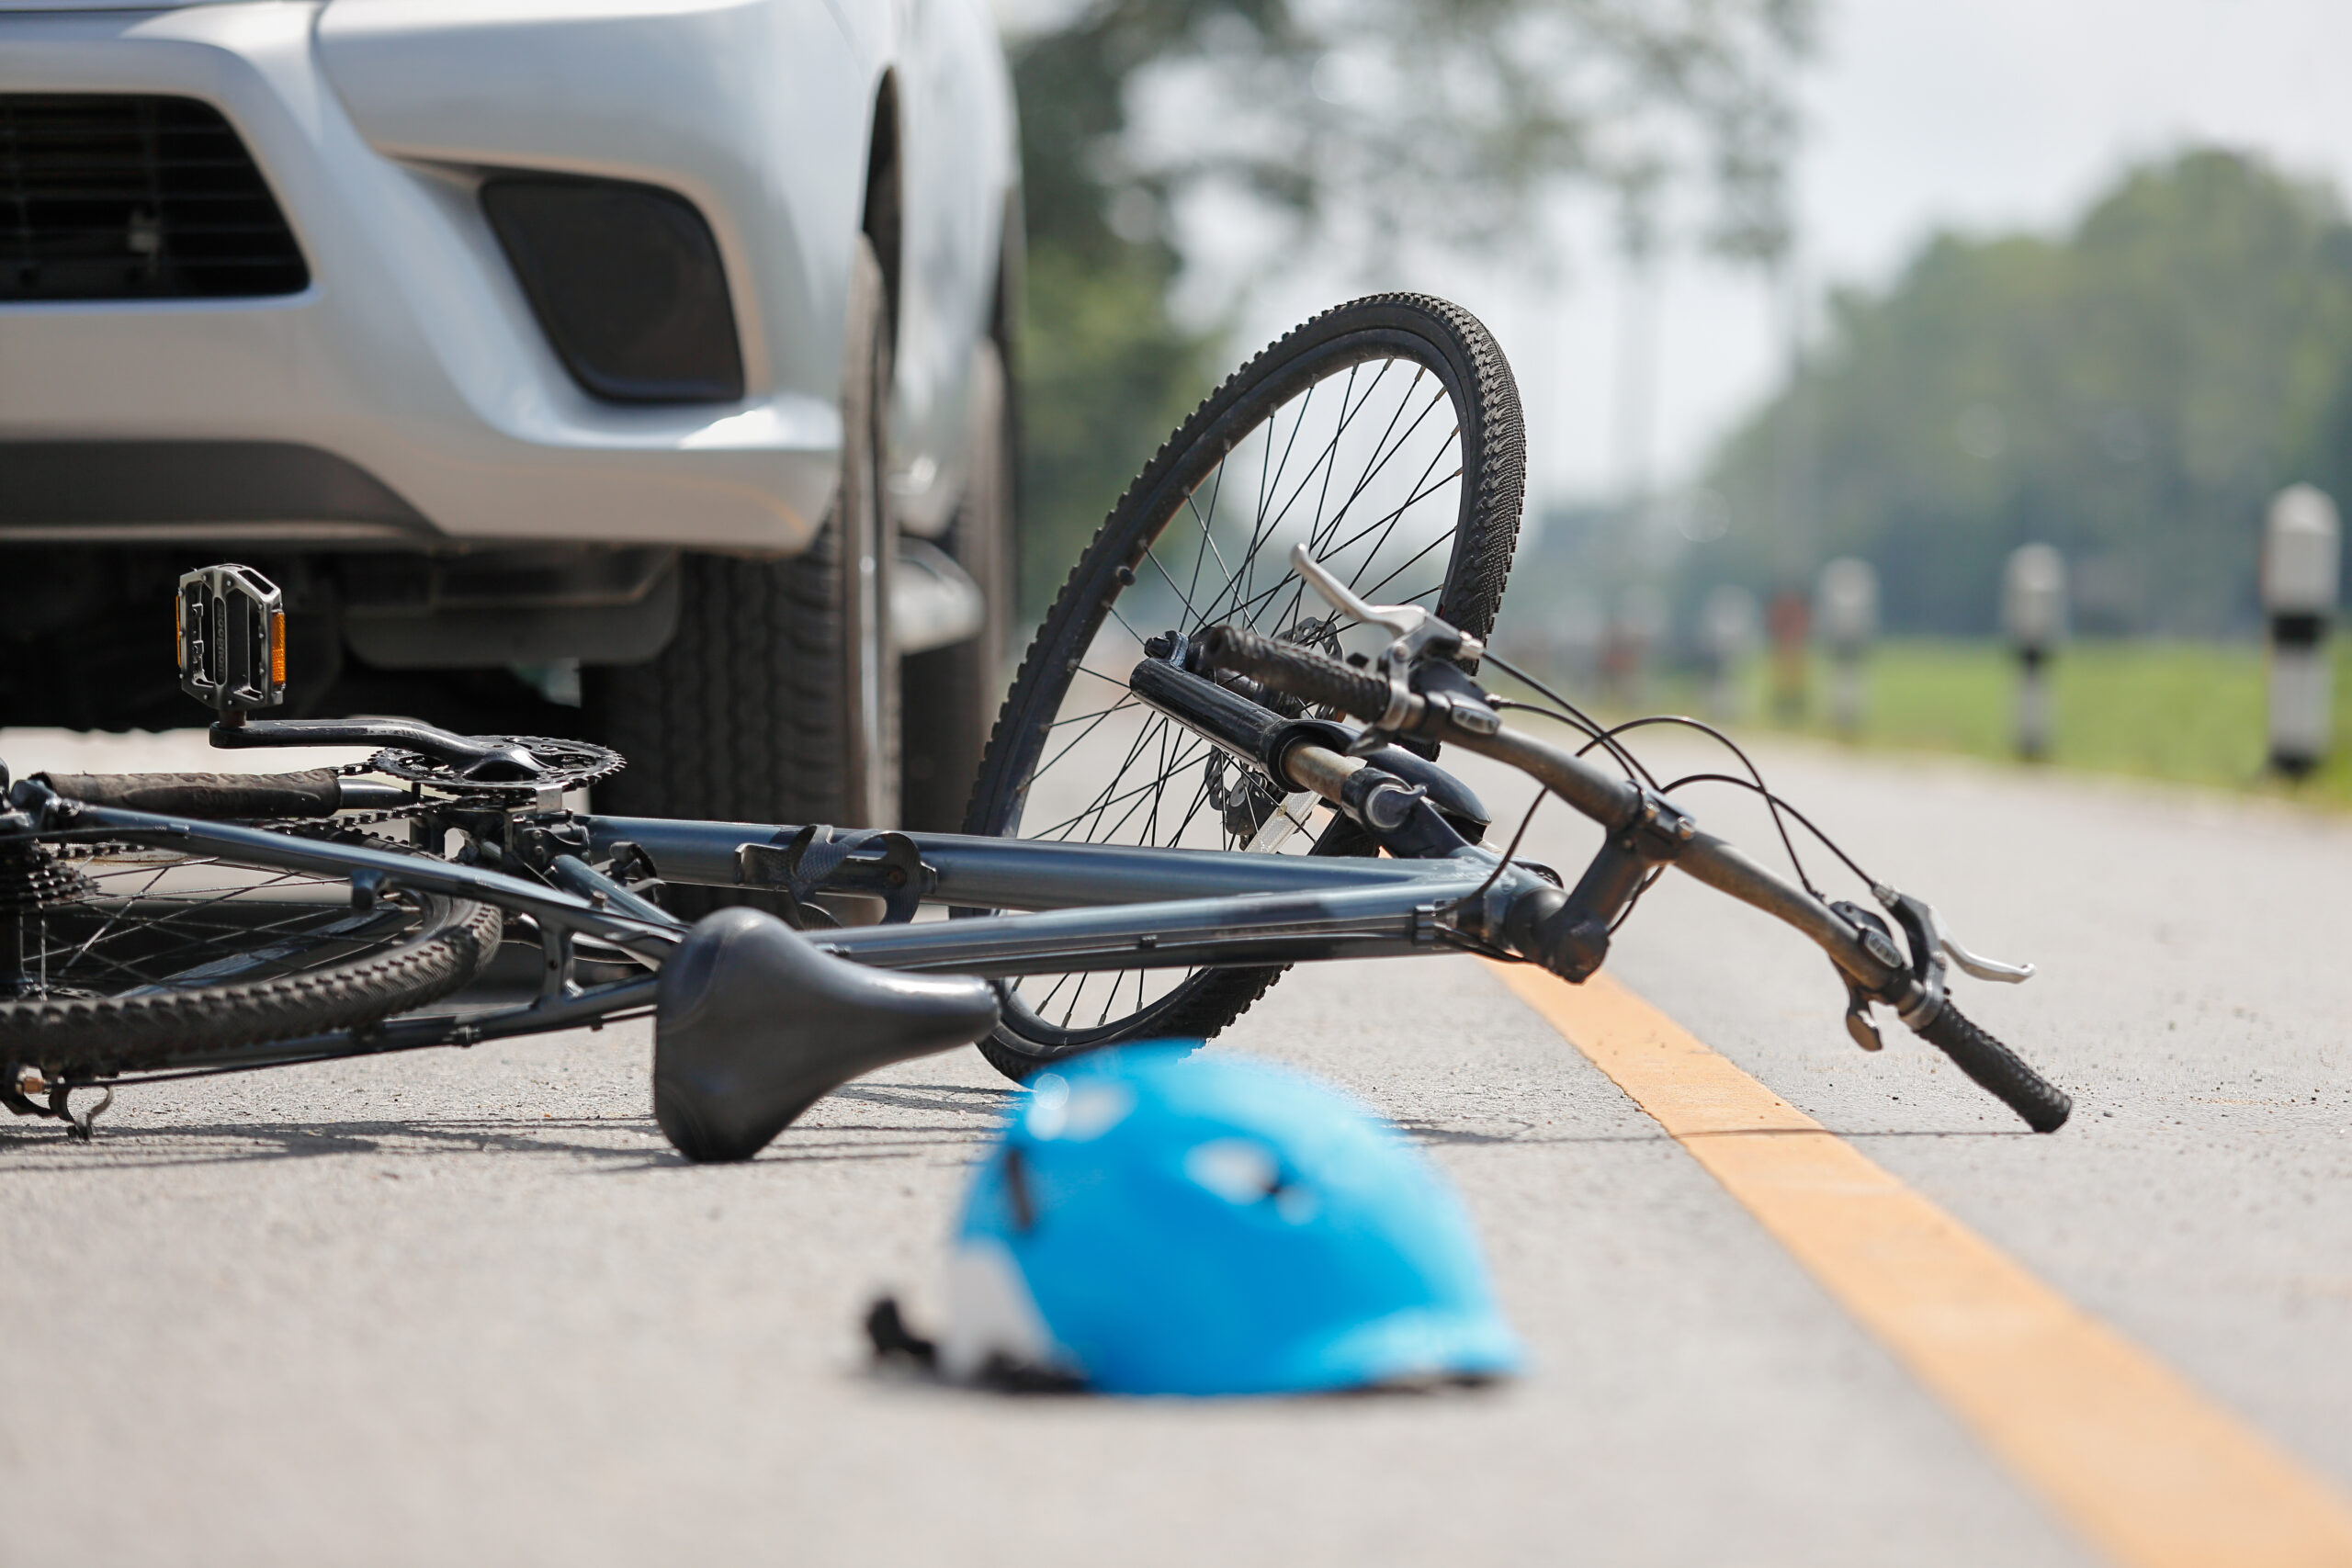 Injured cyclists in a bicycle crash